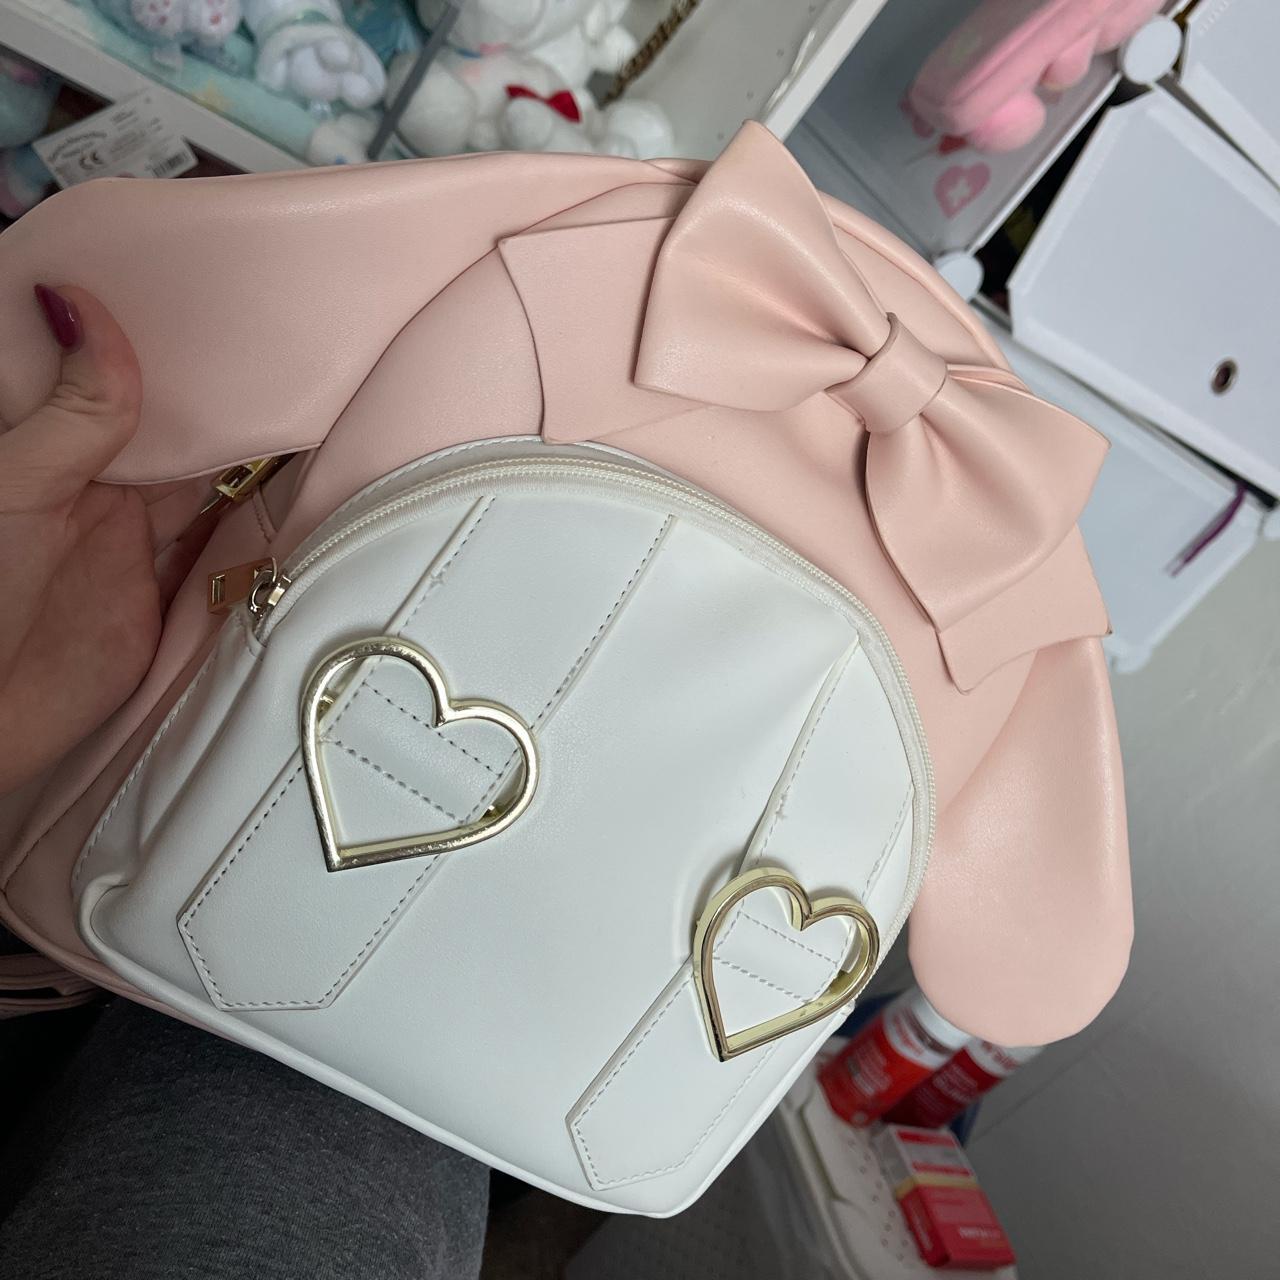 Mymelody x DearMyLove Sanrio Backpack 🌸 Rare and in... - Depop